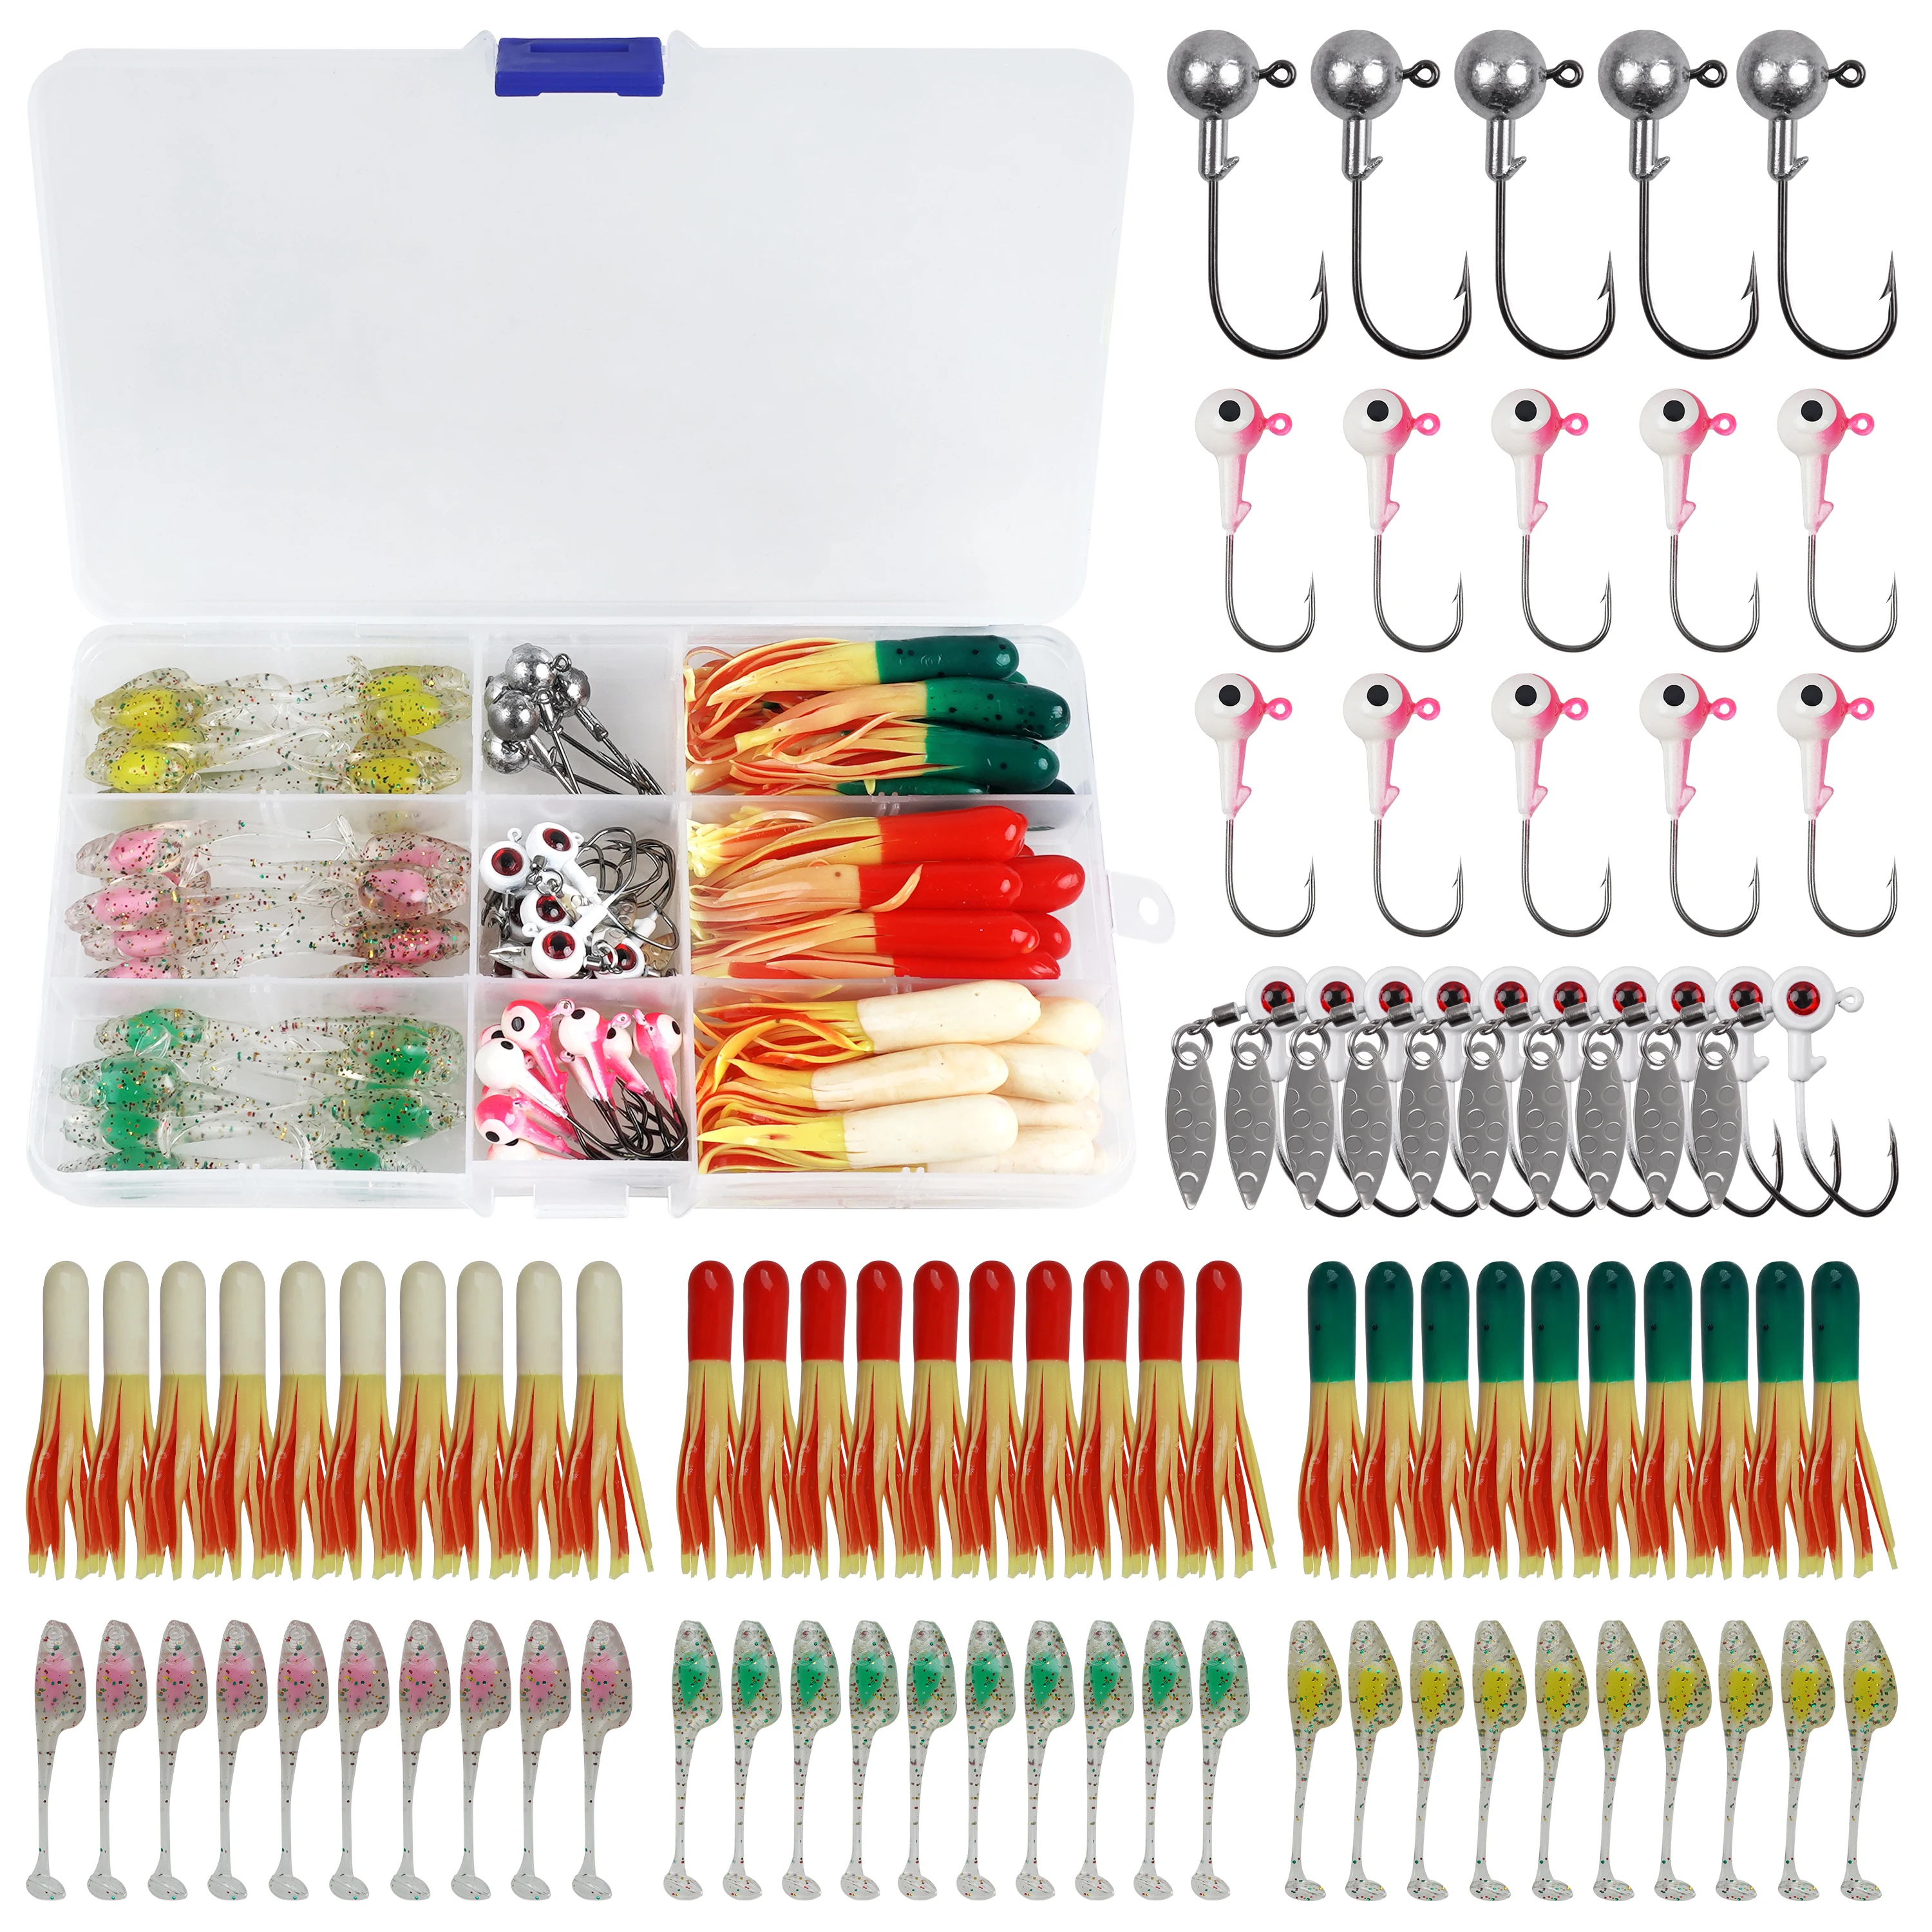 https://ae01.alicdn.com/kf/S889d395dd8fe492cbd85d0f5b0c16986Z/85pcs-Crappie-Lures-kit-Crappie-Bait-Set-with-Jig-Heads-Hooks-Soft-Plastic-Fishing-Lures-for.jpg